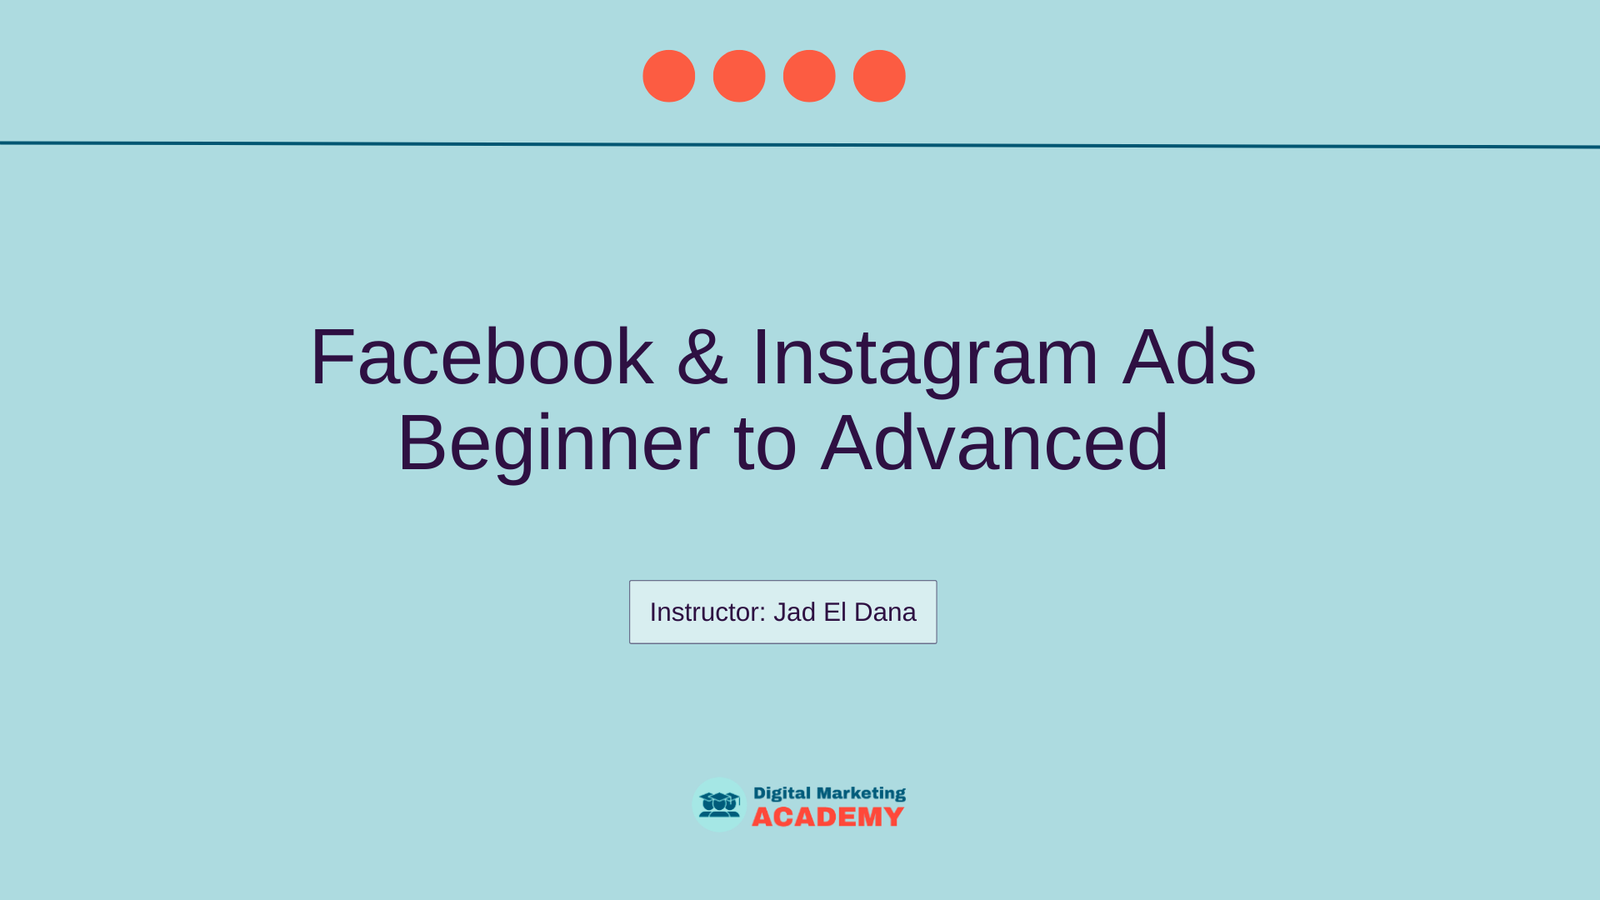 Facebook & Instagram Ads for Ecommerce Products or Services: Complete Beginner to Advanced Course